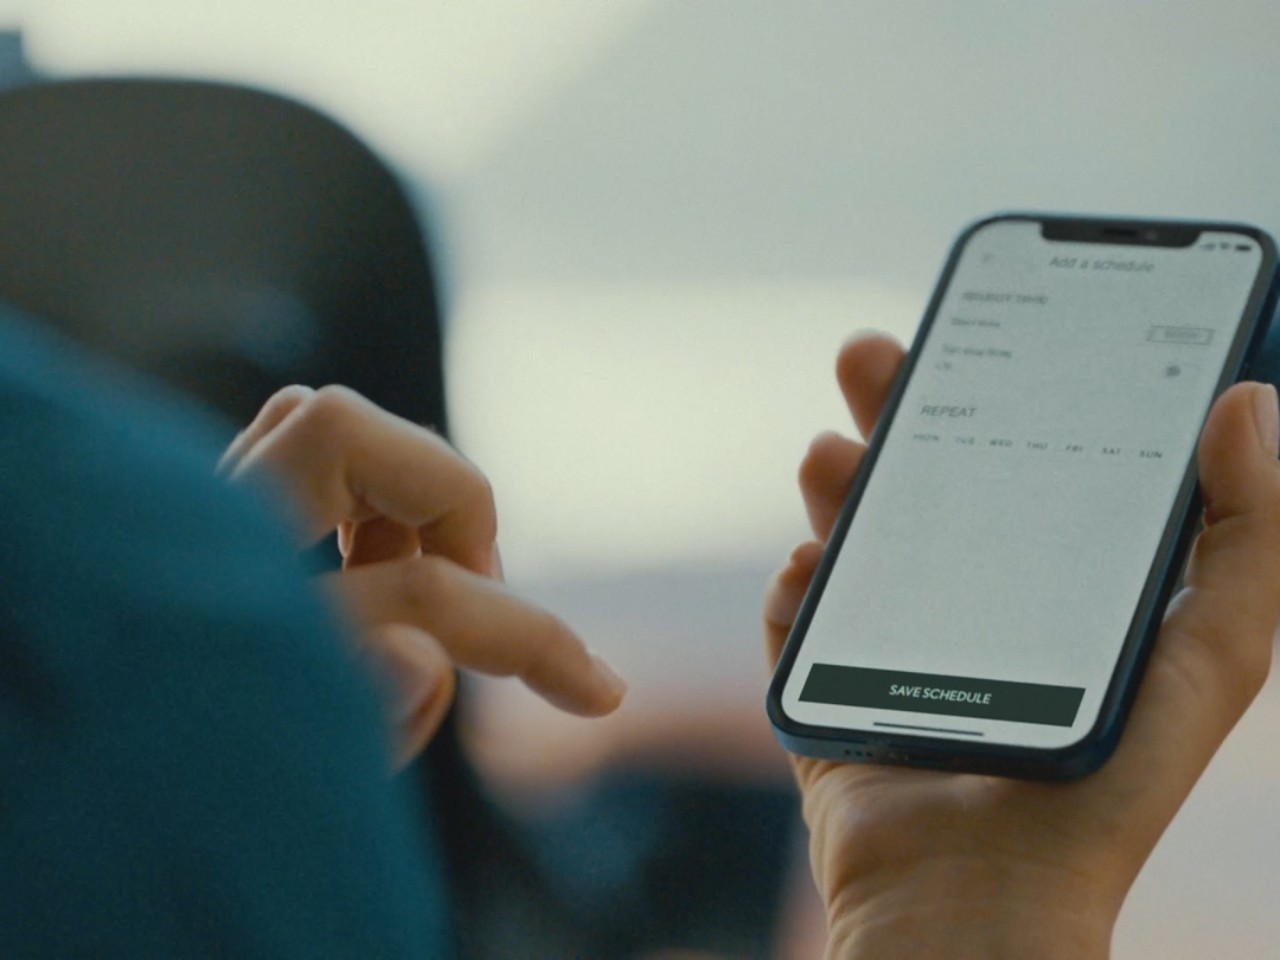 A person using a mobile phone to access the Lexus Link app